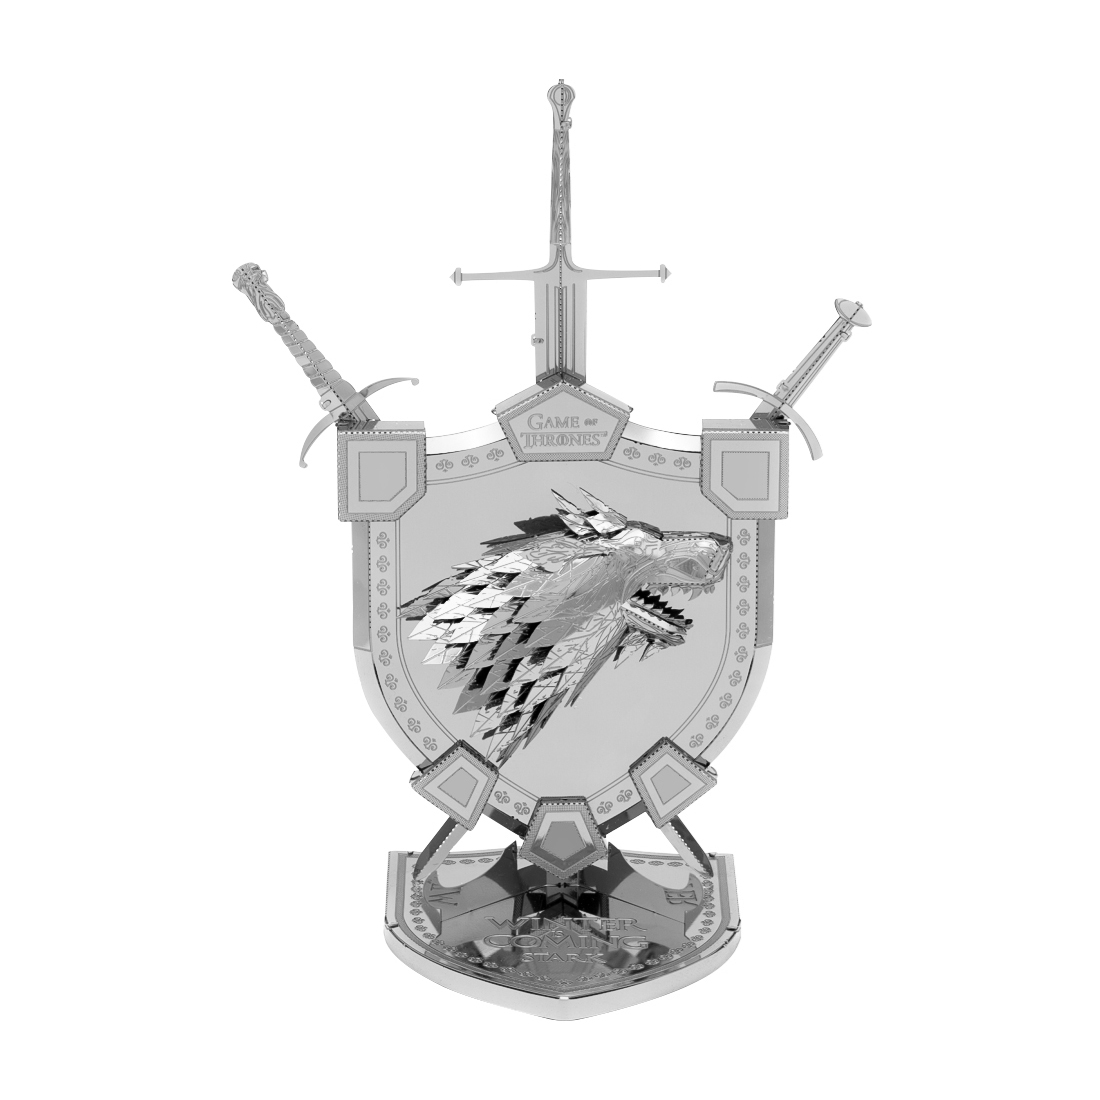 Fascinations Toys & Gifts Metal Earth ICONX 3D Metal Model Kit - Game of Thrones House Stark Sigil